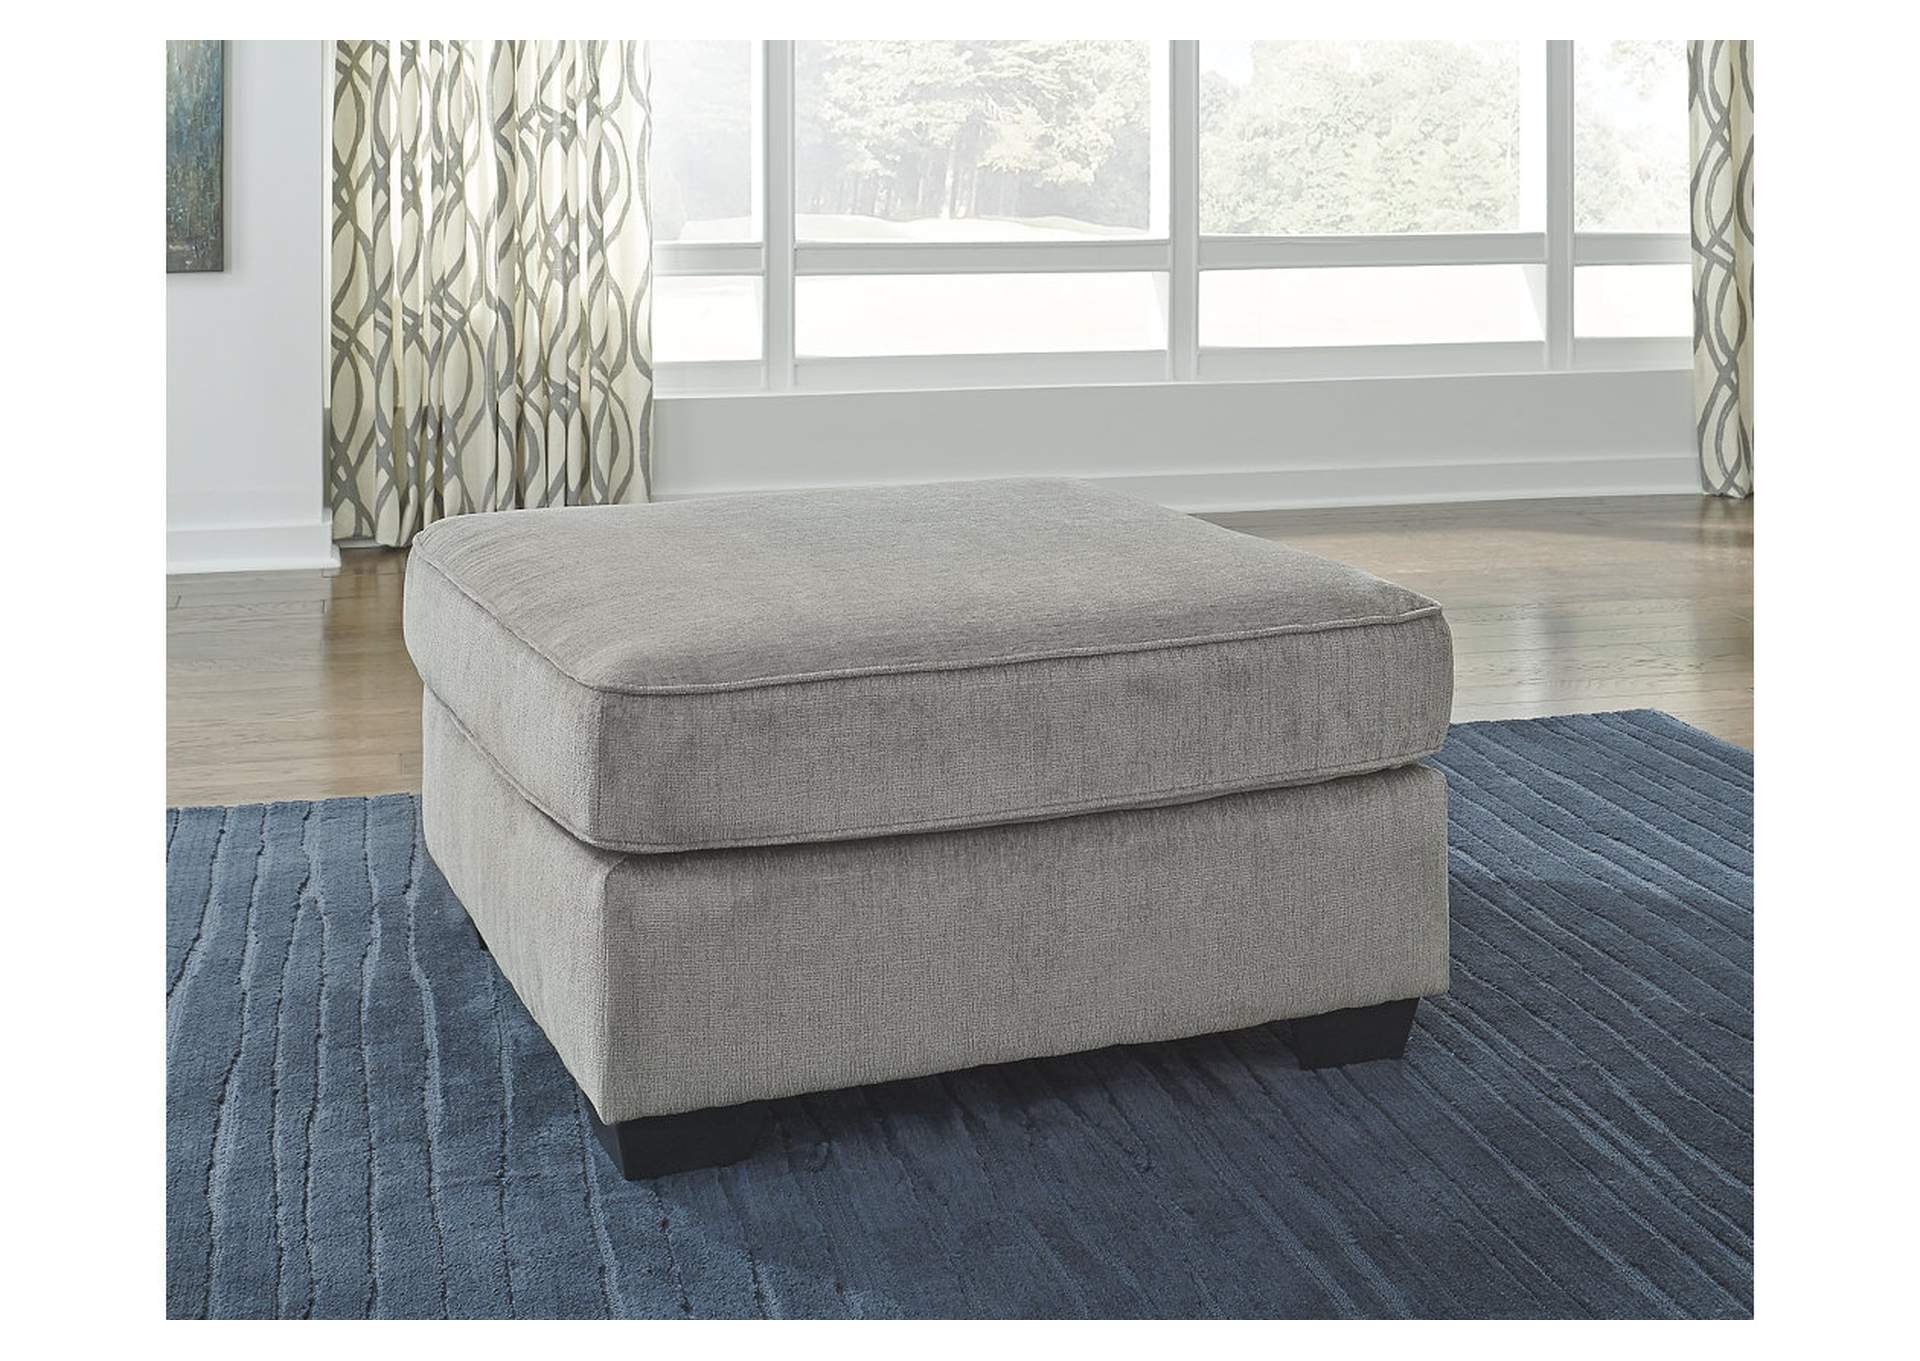 Altari 2-Piece Sectional with Ottoman,Signature Design By Ashley